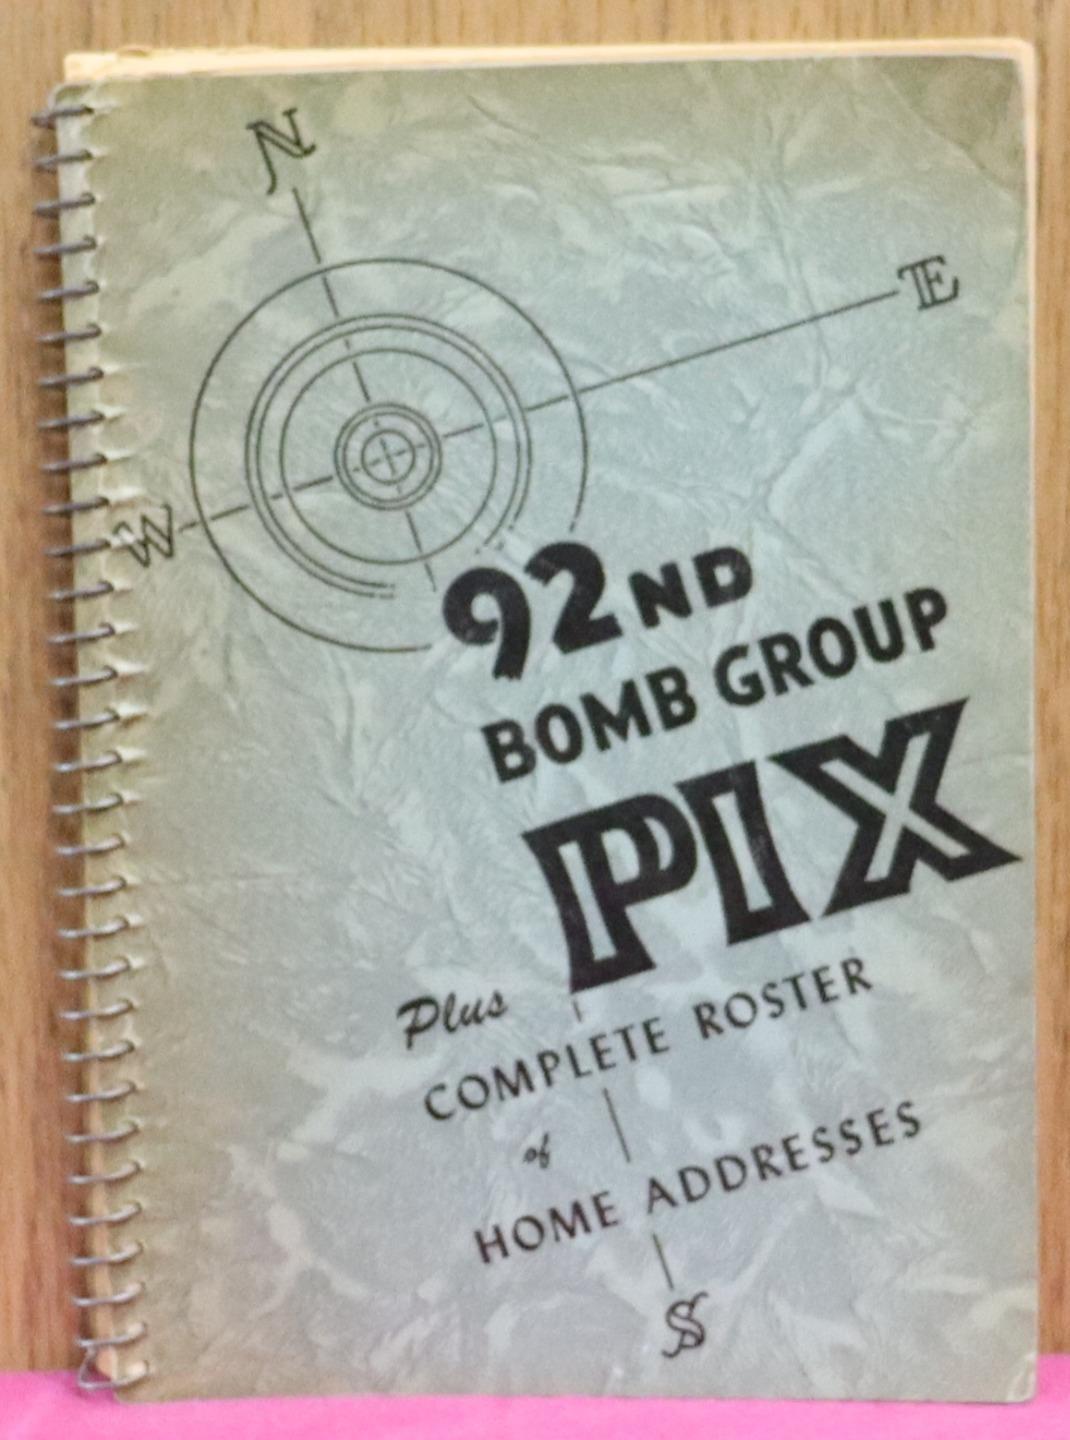 92nd BOMB GROUP PIX PLUS COMPLETE ROSTER OF HOME ADDRESSES SPIRAL BOOK